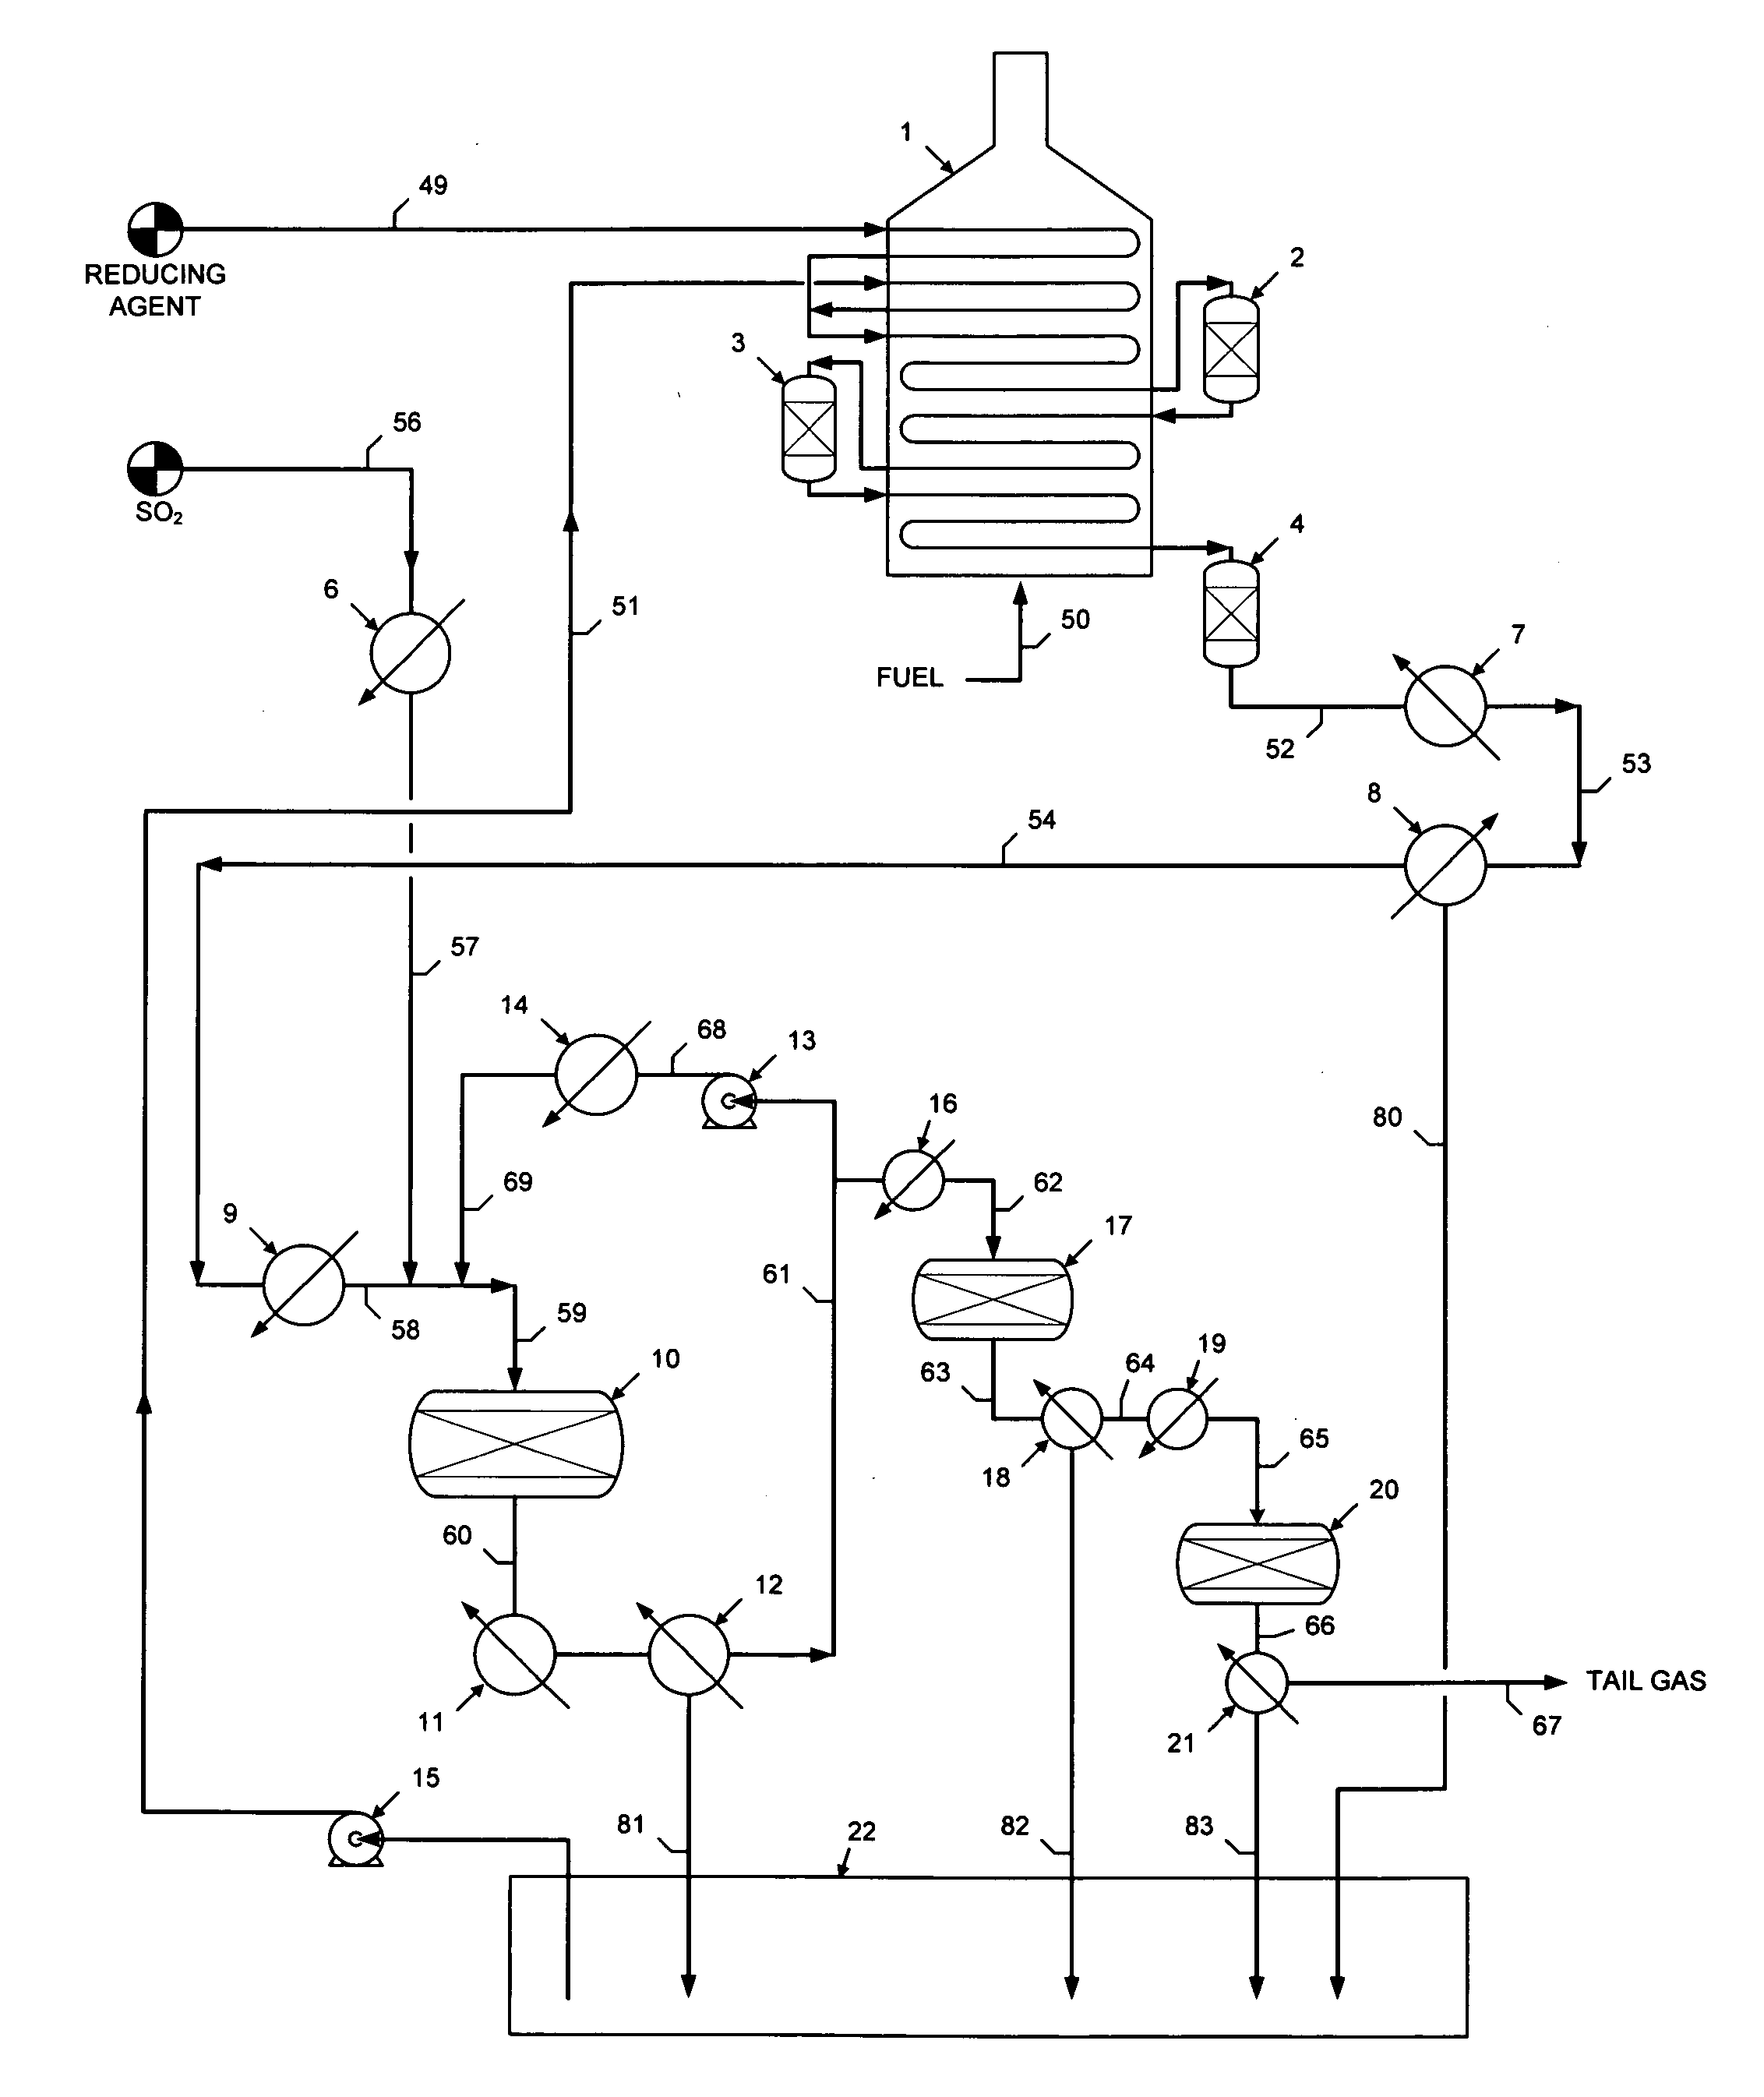 Process for the production of sulfur from sulfur dioxide